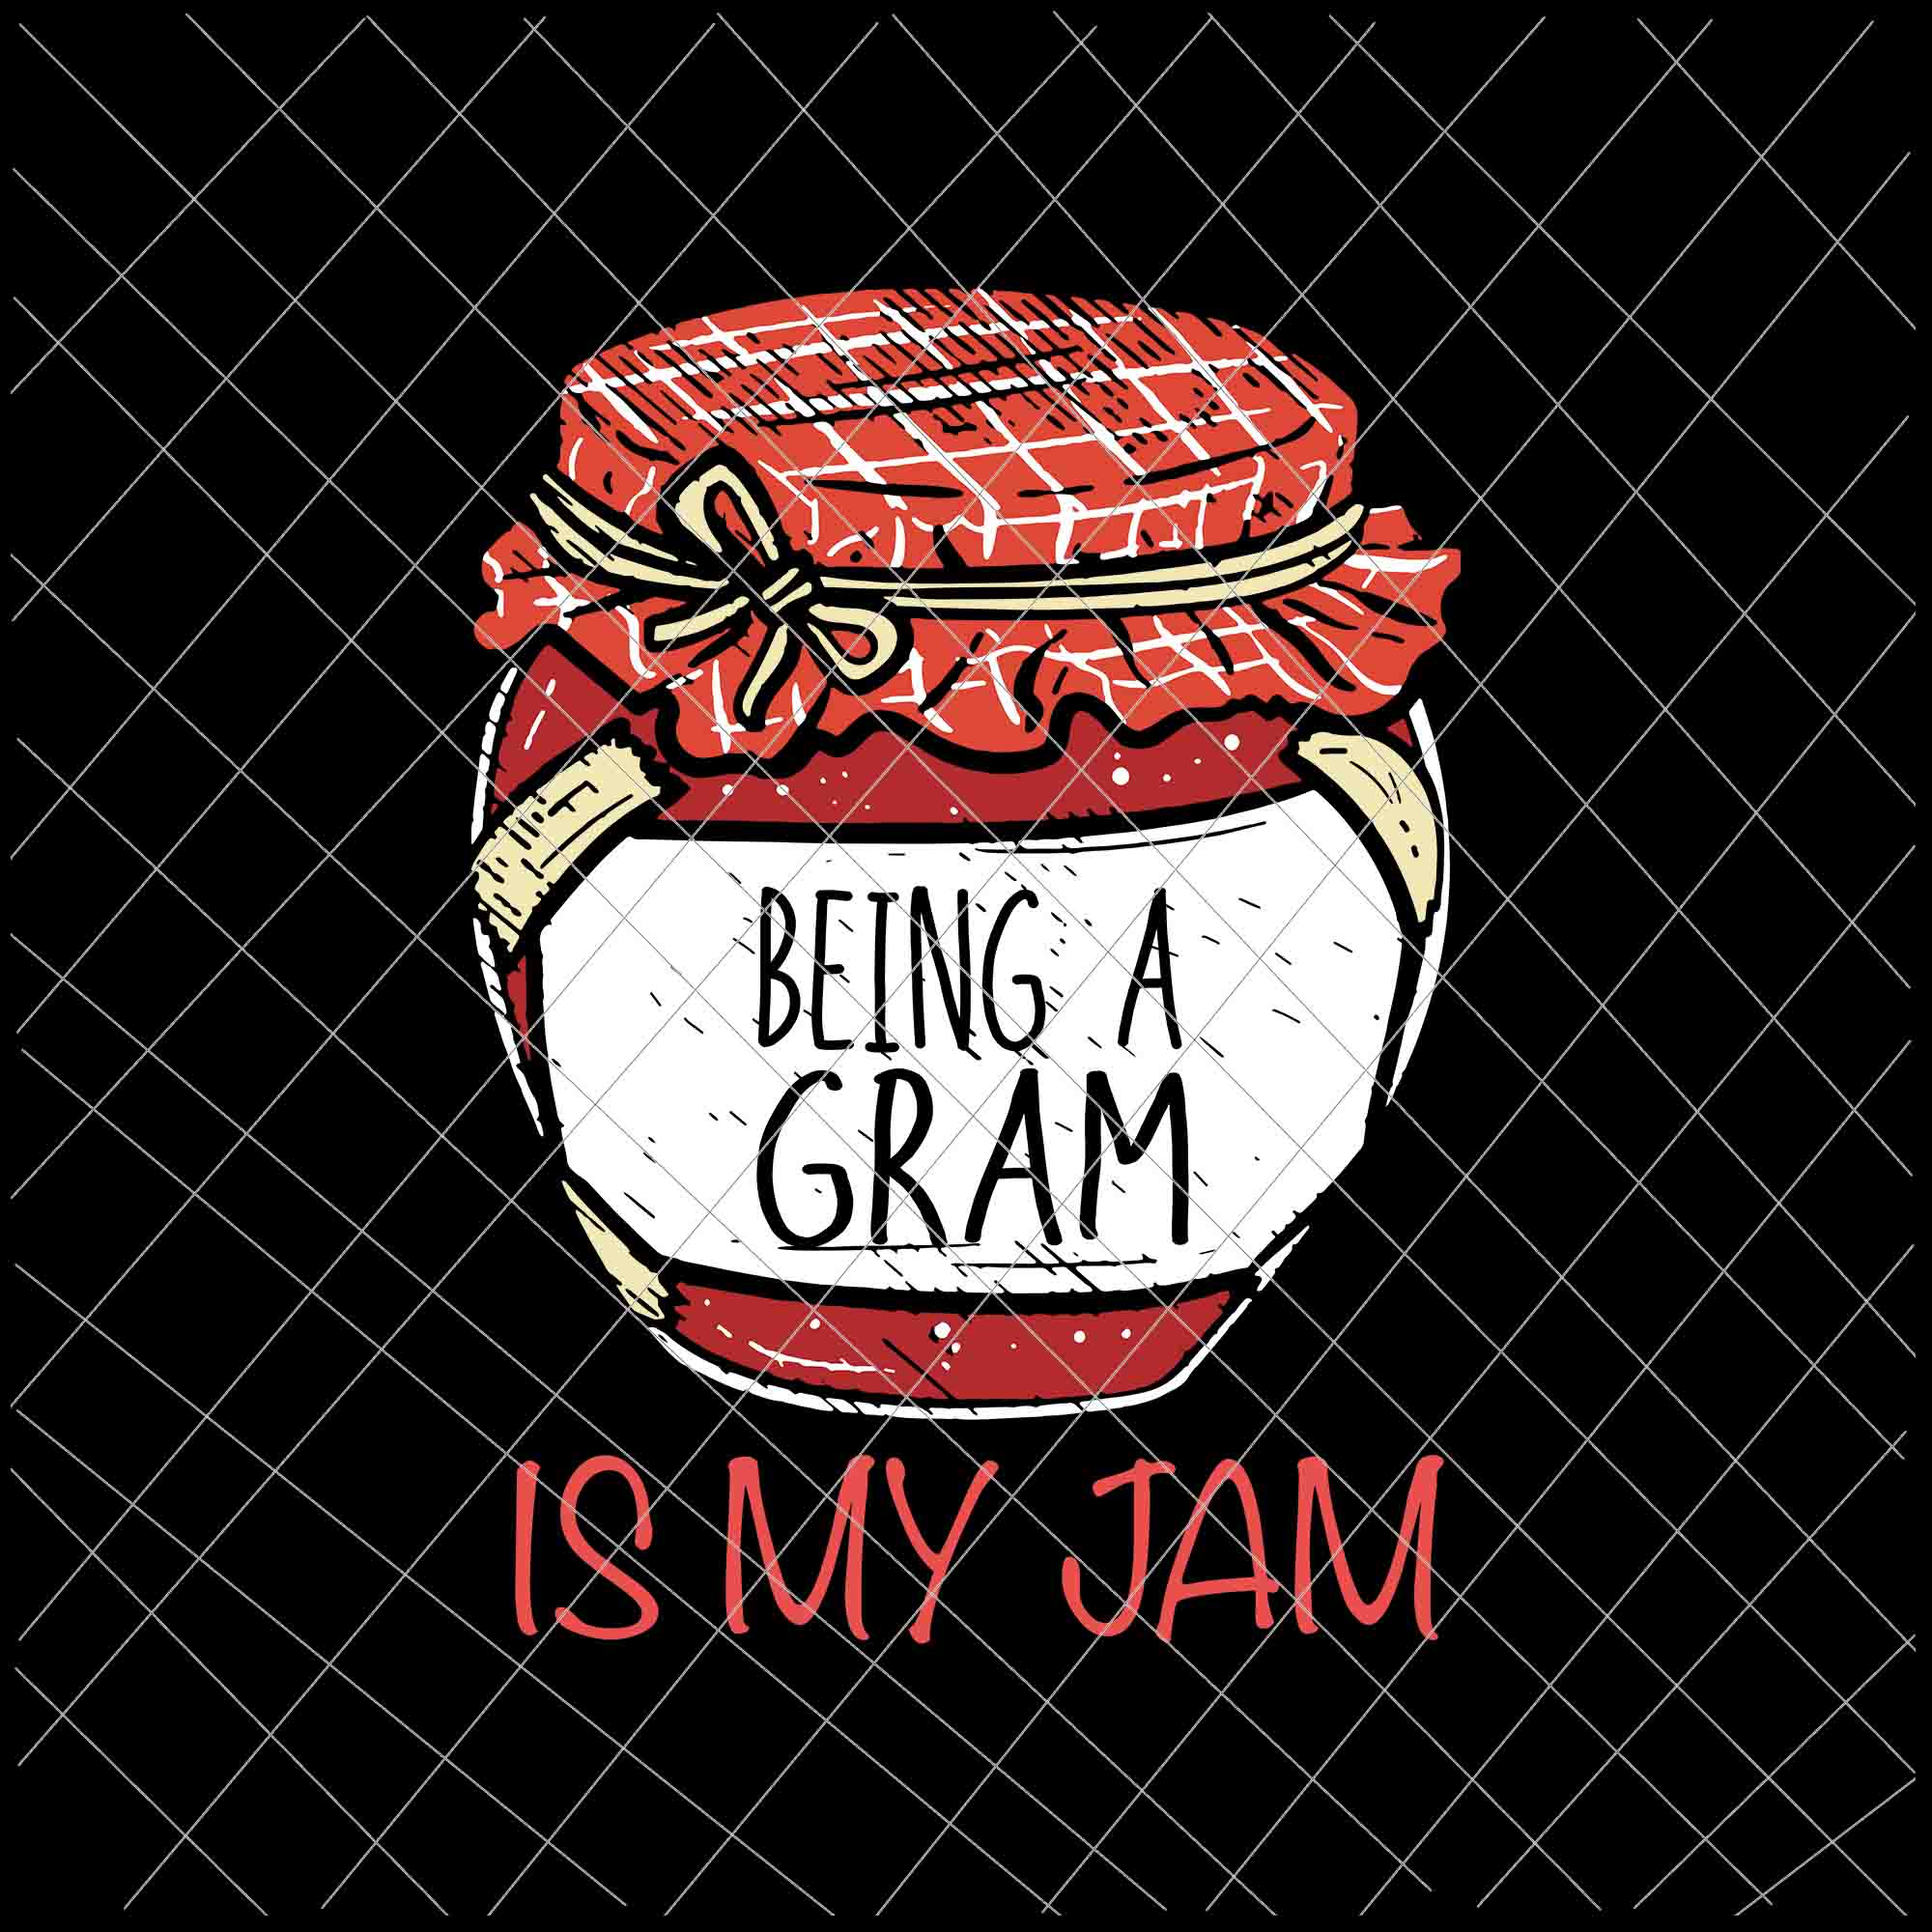 Being a Gram is my jam svg, meme quote svg, fun grandma svg, meme quote grandma svg